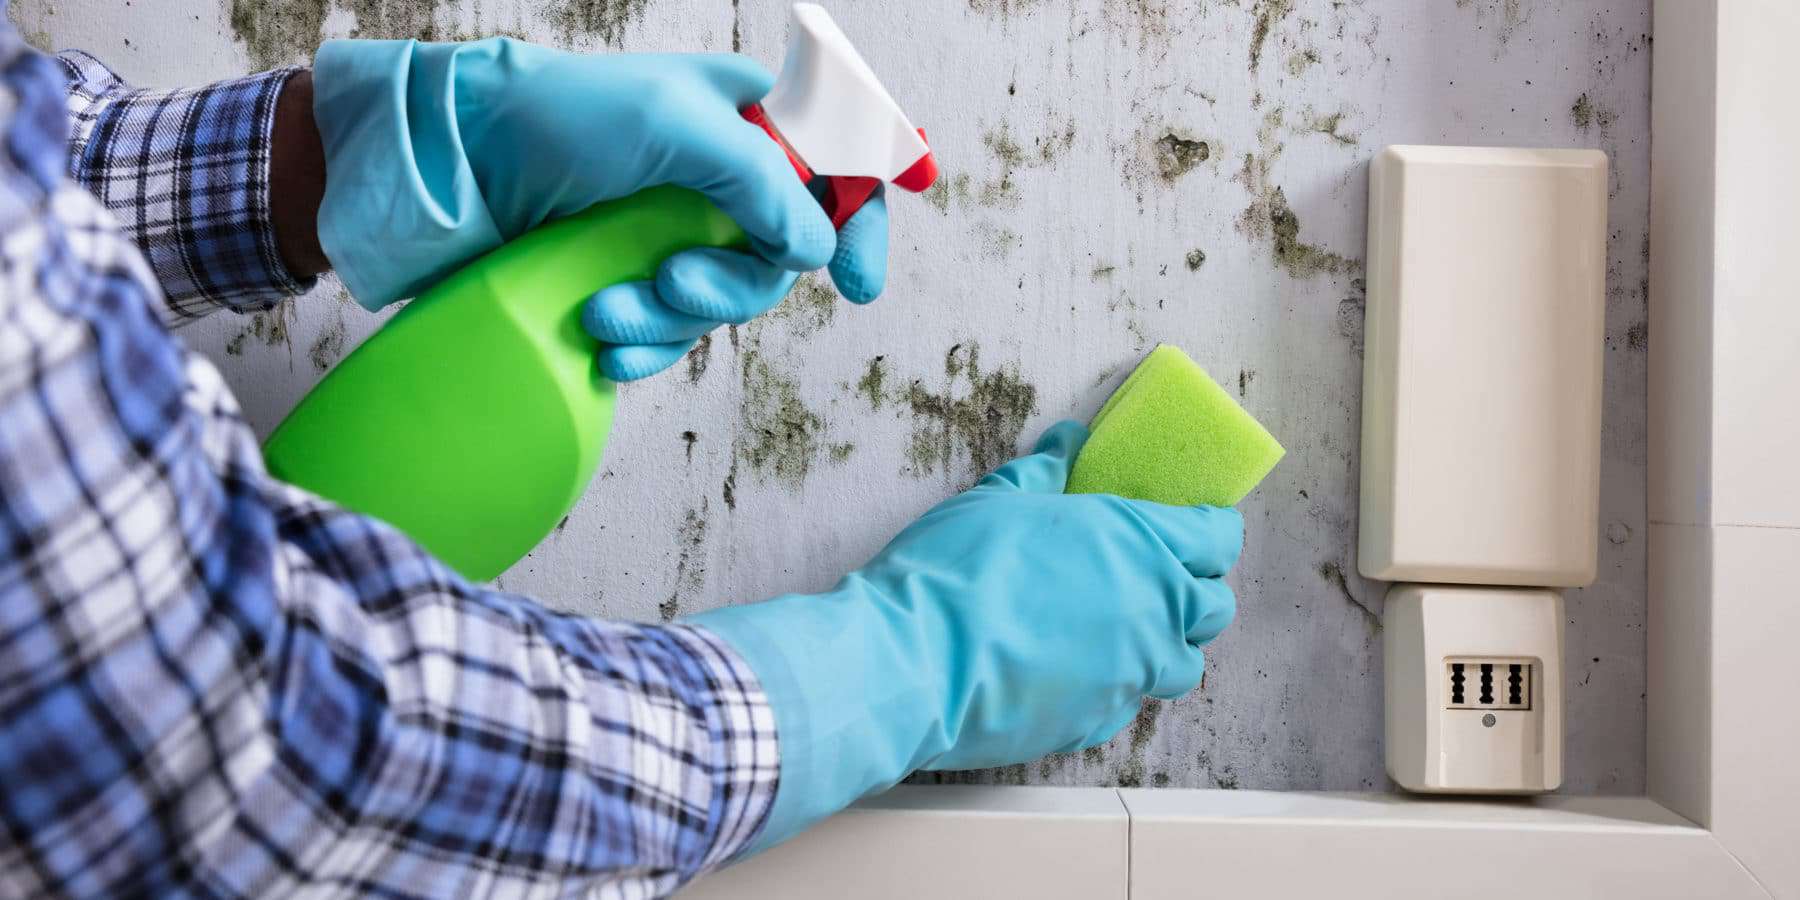 Housekeeper's Hand With Glove Cleaning Green Mold From Wall With Sponge And Spray Bottle